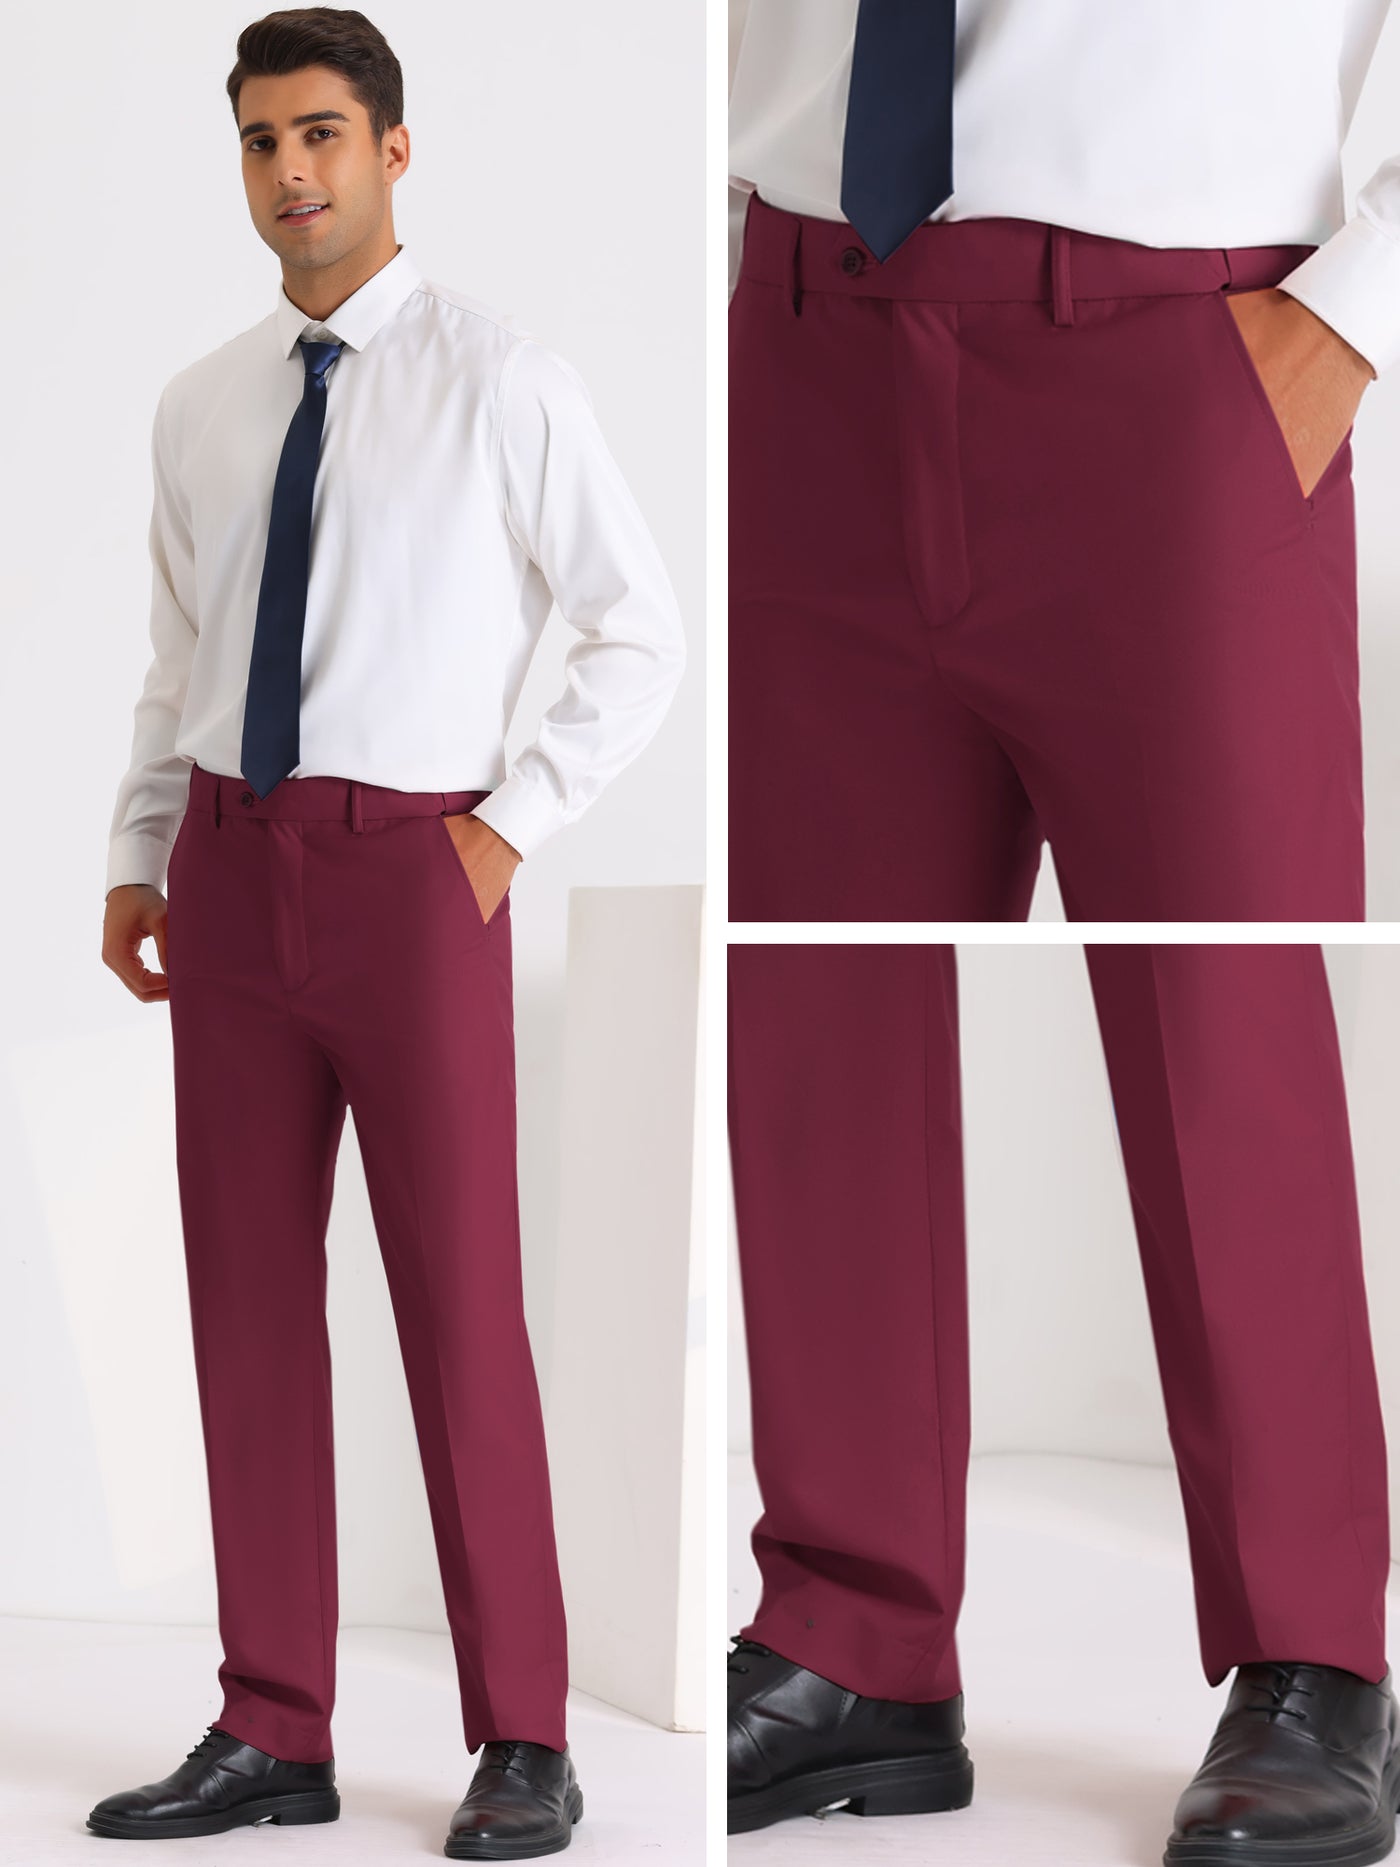 Bublédon Business Dress Pants for Men's Skinny Flat Front Wedding Chino Trousers